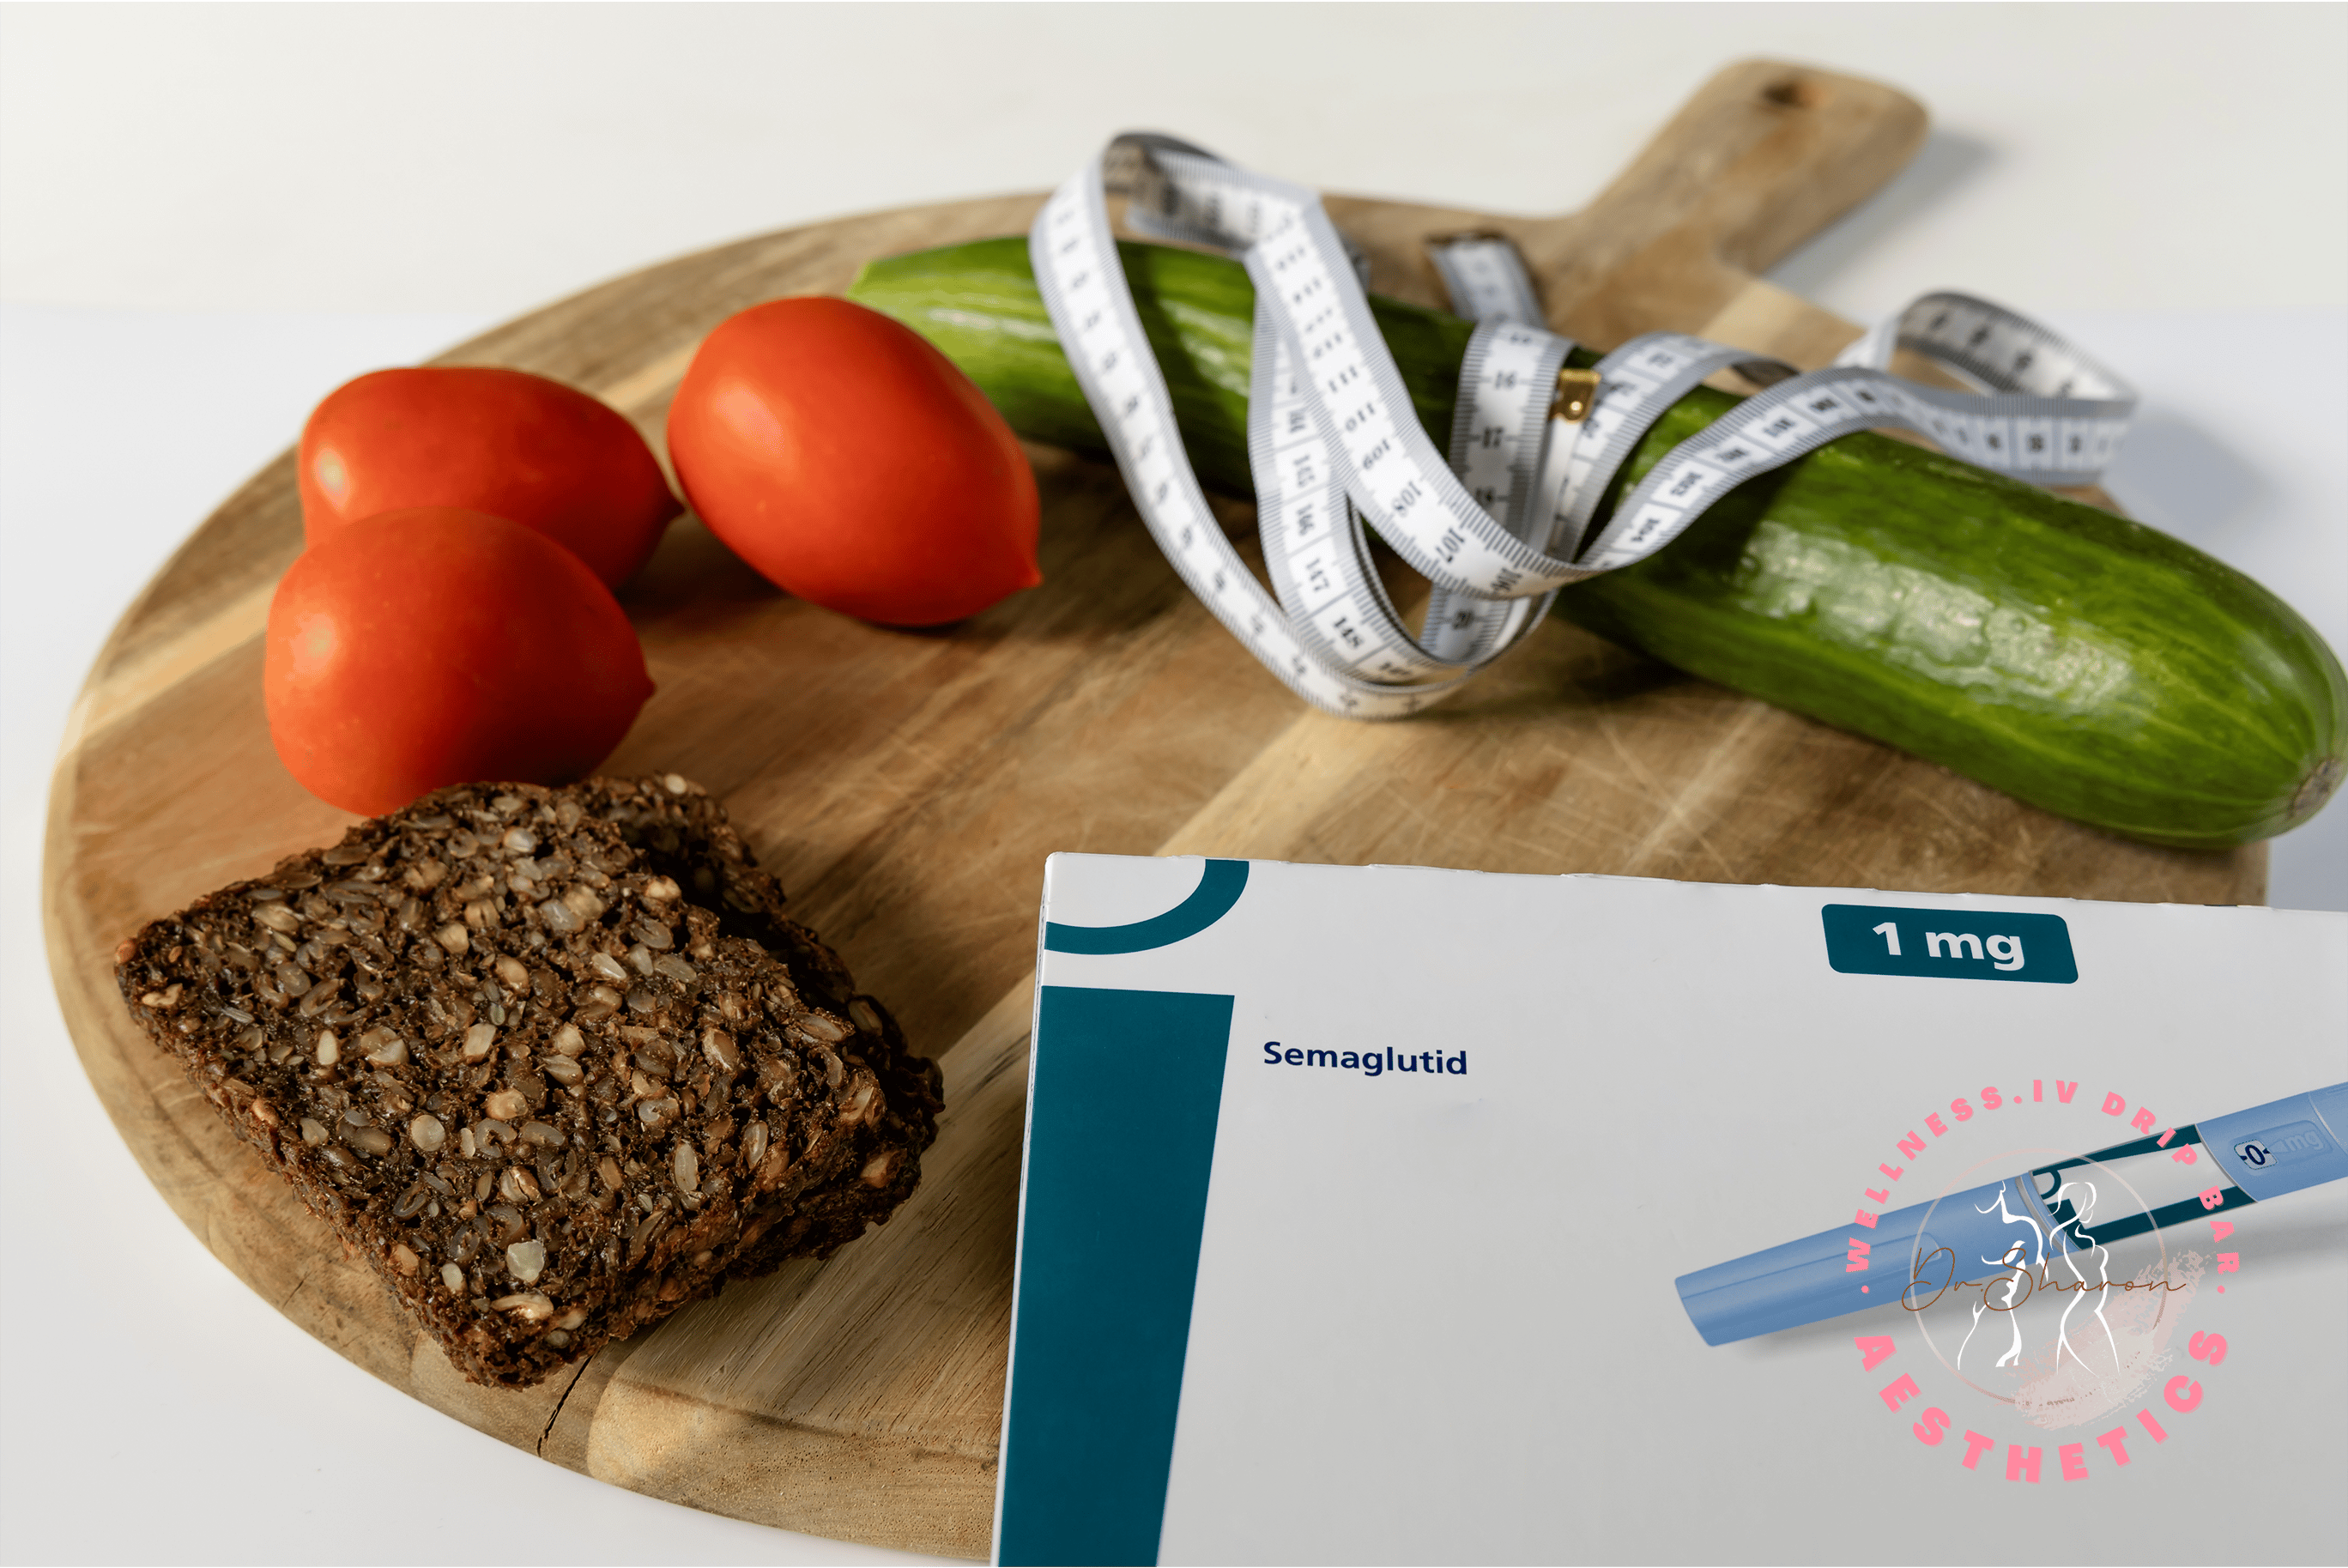 semaglutide food measuring tape  with tomatoes and cucumber